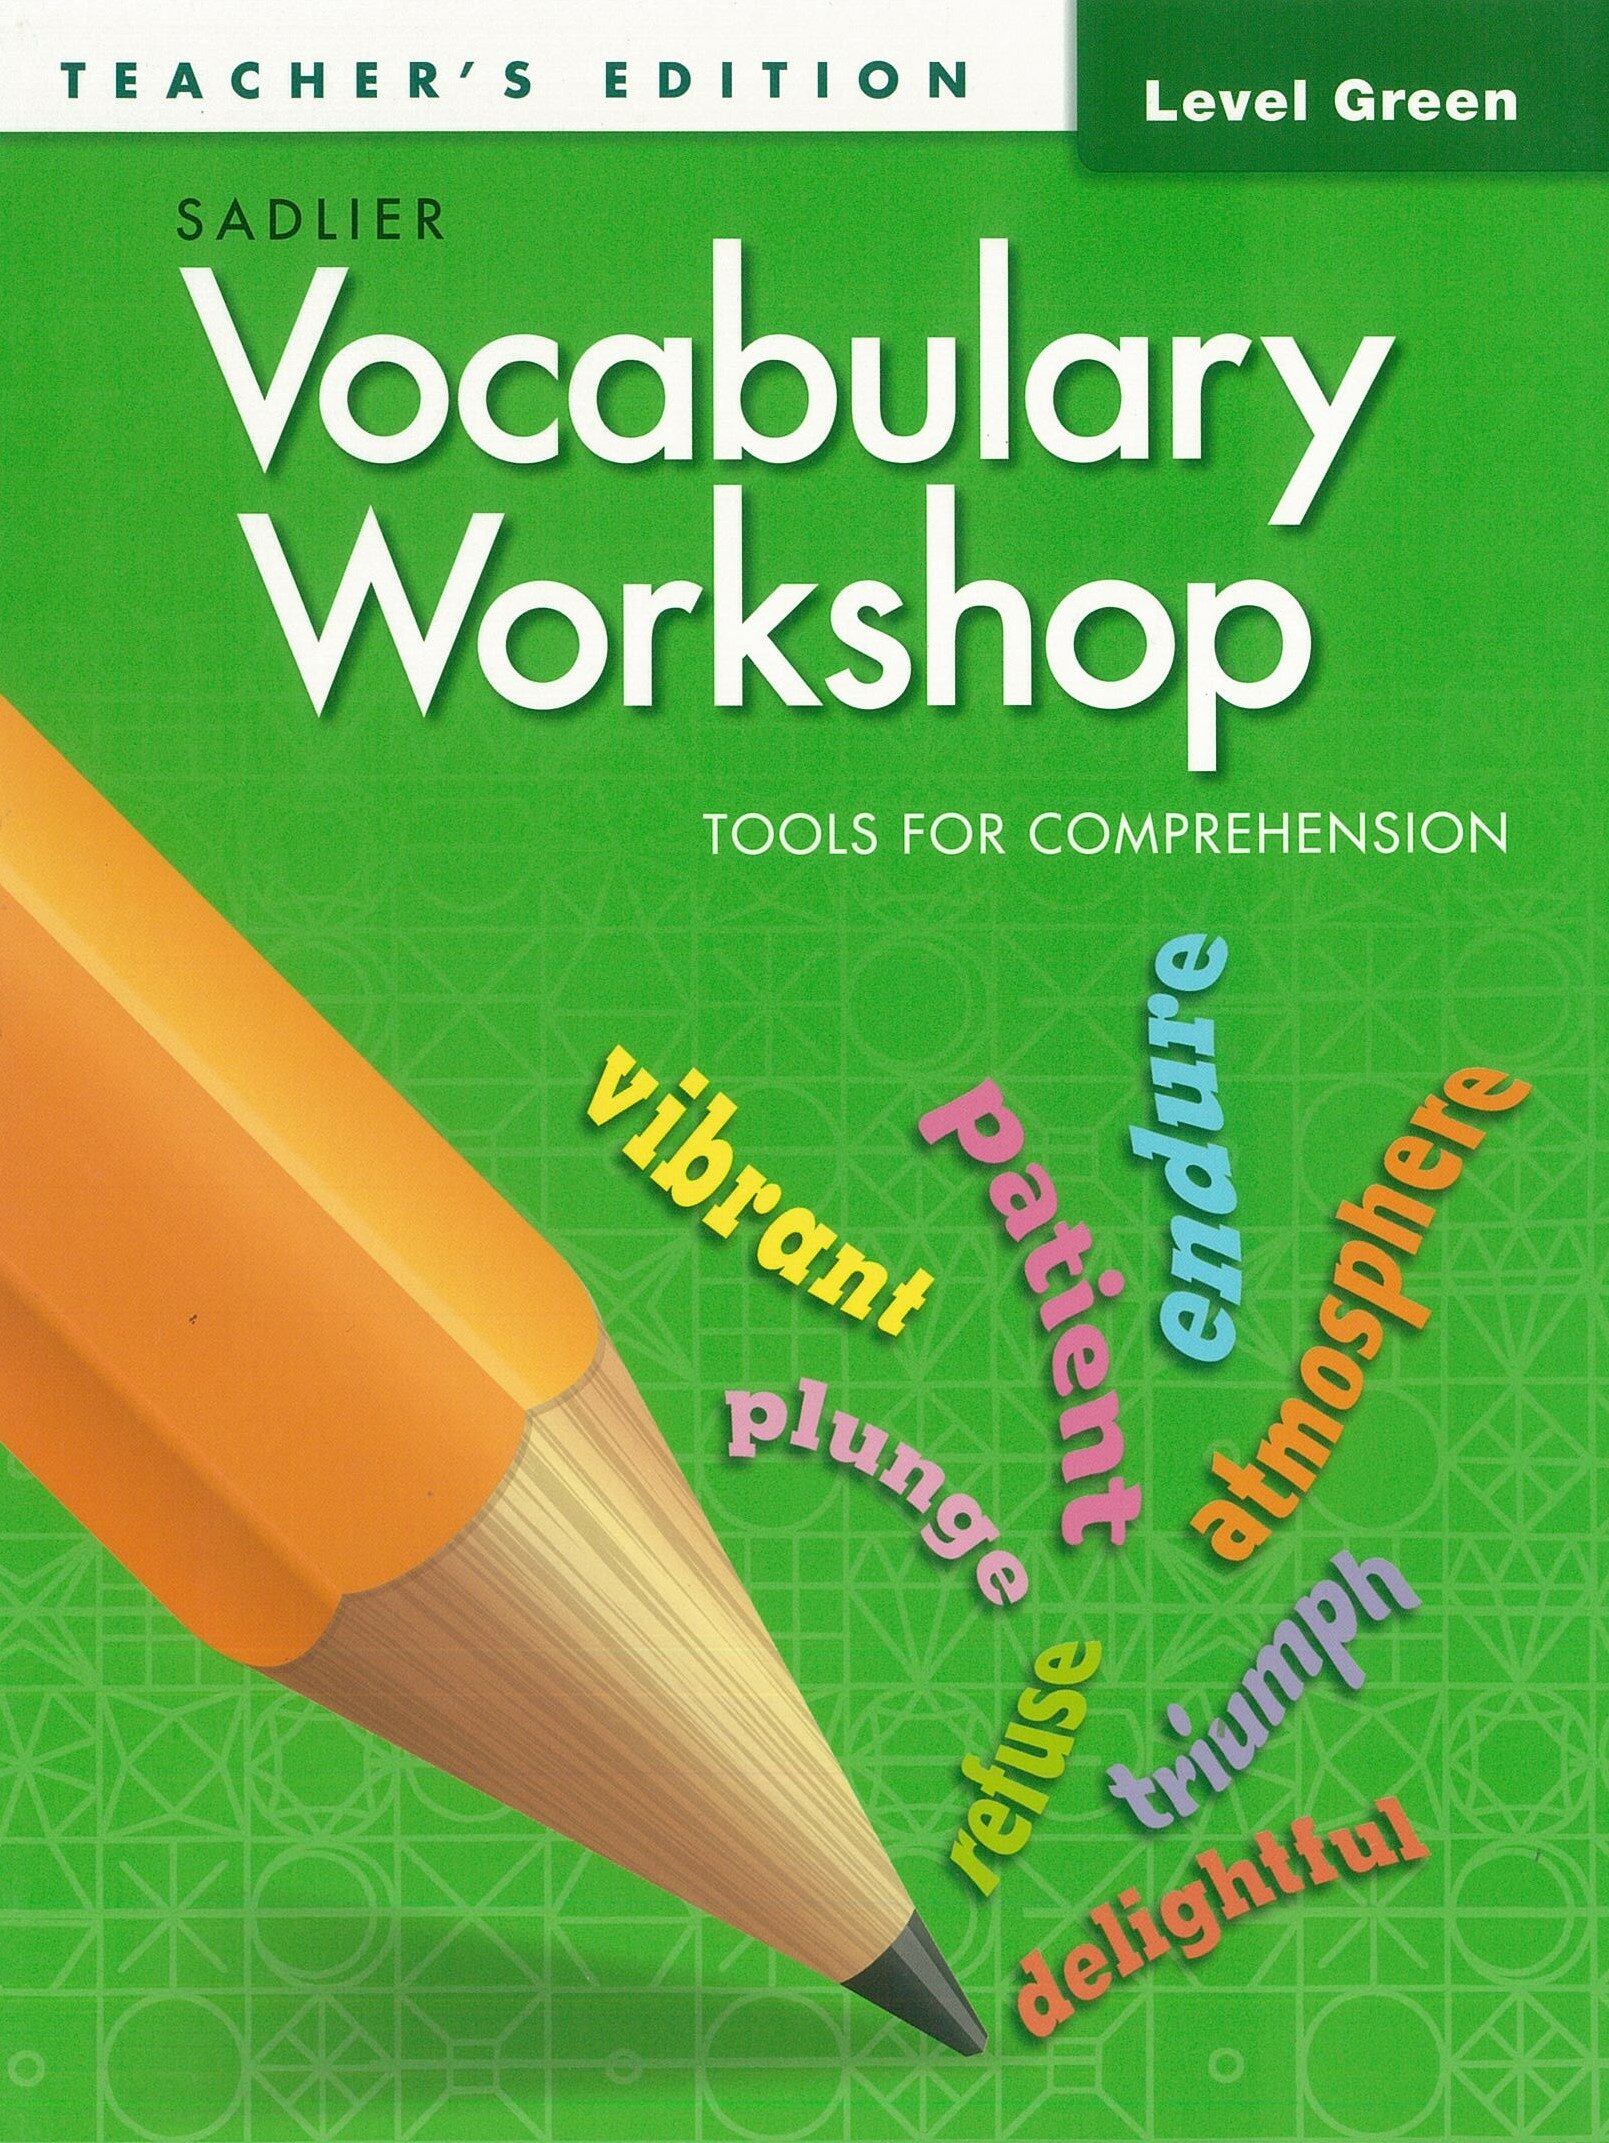 Vocabulary Workshop Tools for Comprehension Teachers Edition Green(G-3) (Paperback)